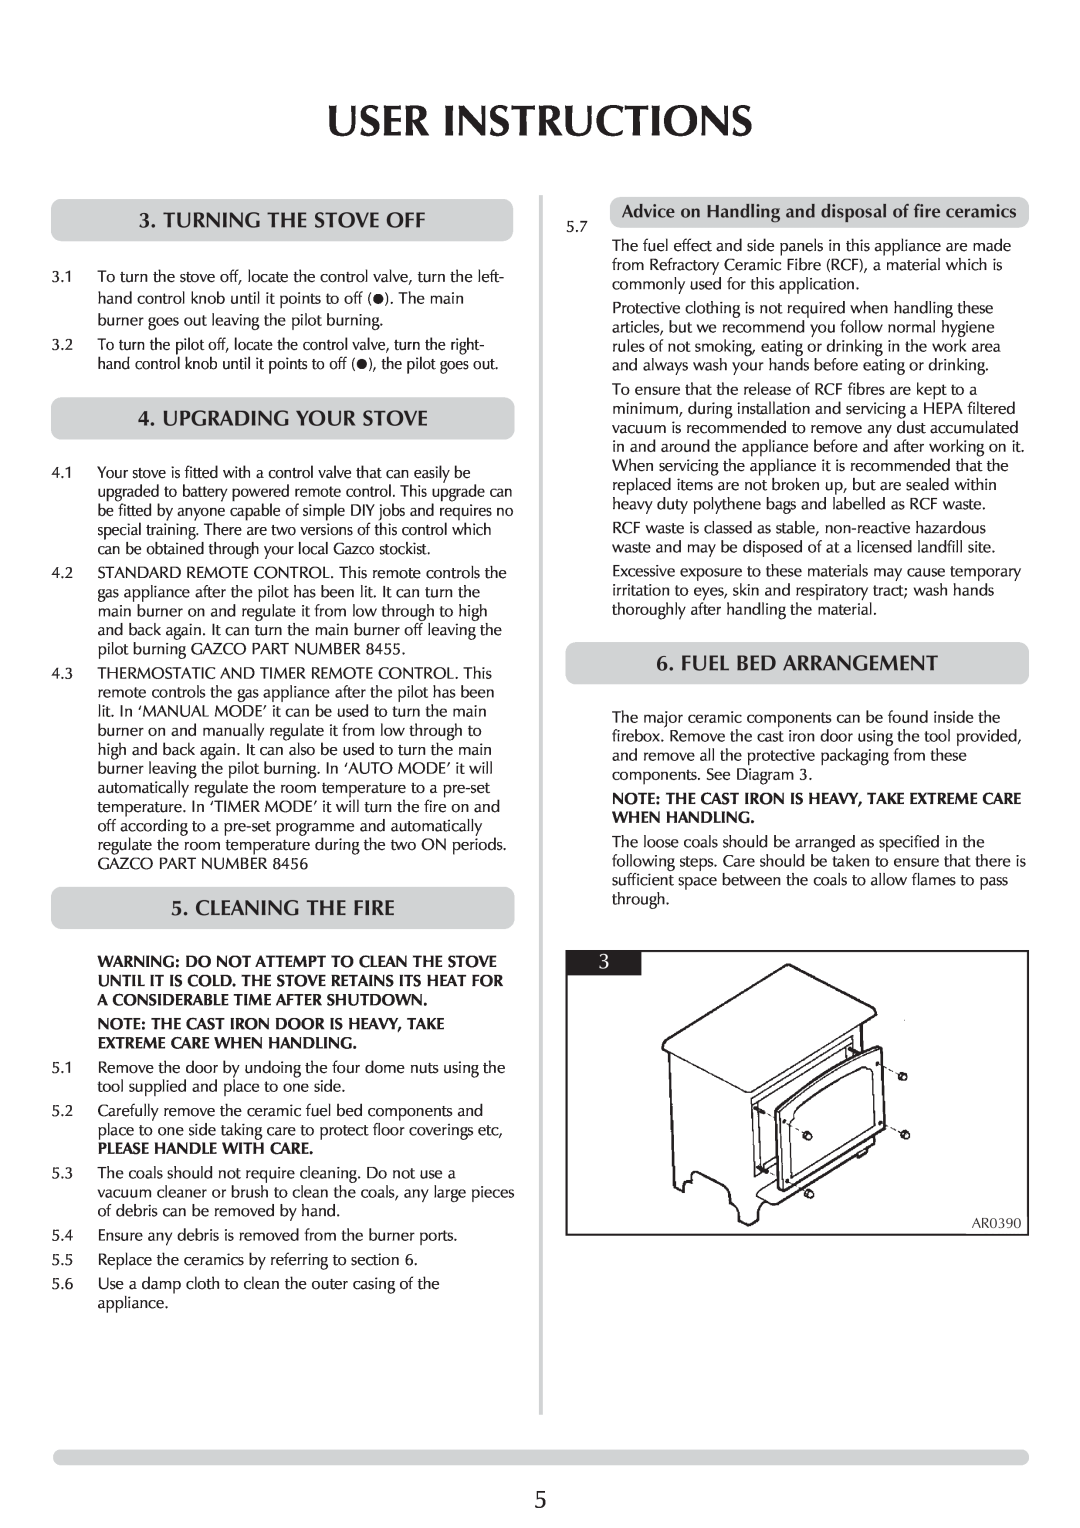 Stovax P8564 User Instructions, Turning The Stove Off, Upgrading Your Stove, Cleaning The Fire, Fuel Bed Arrangement 